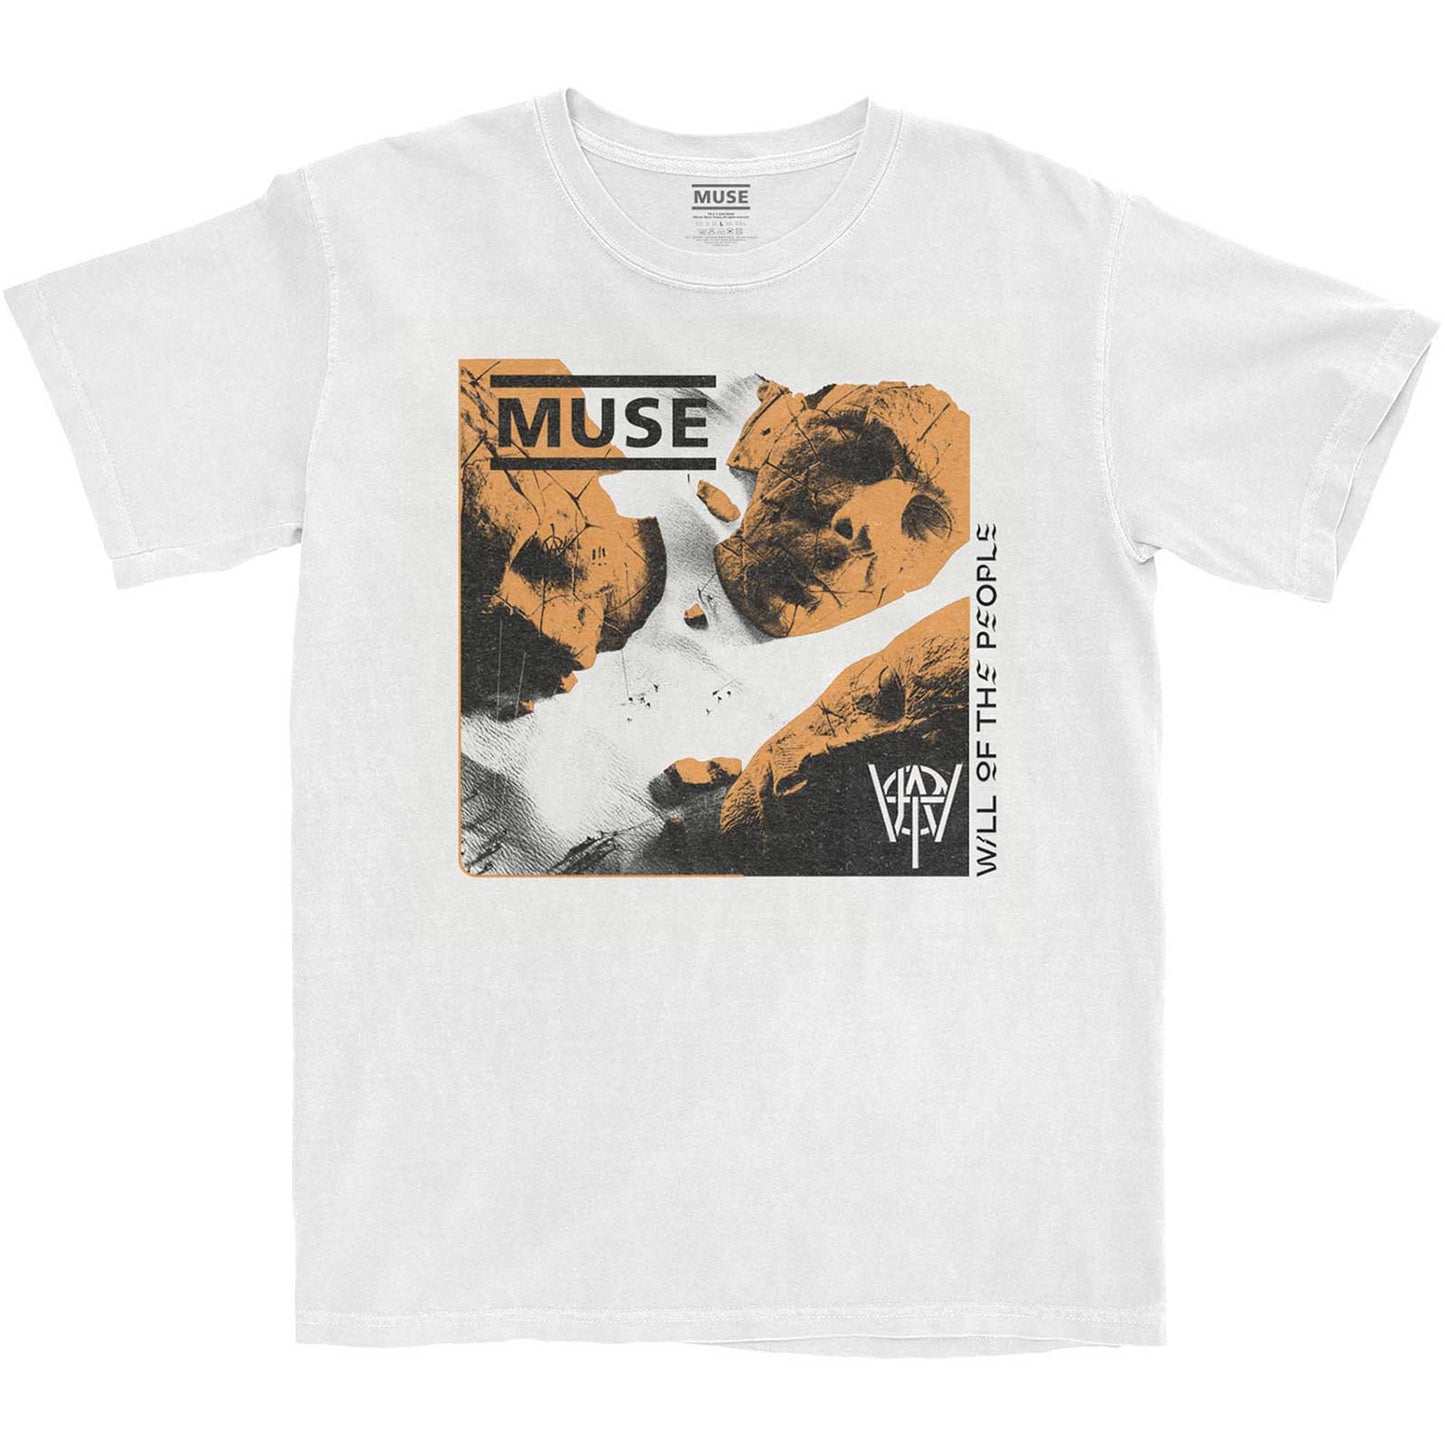 Muse T-Shirt: Will of the People